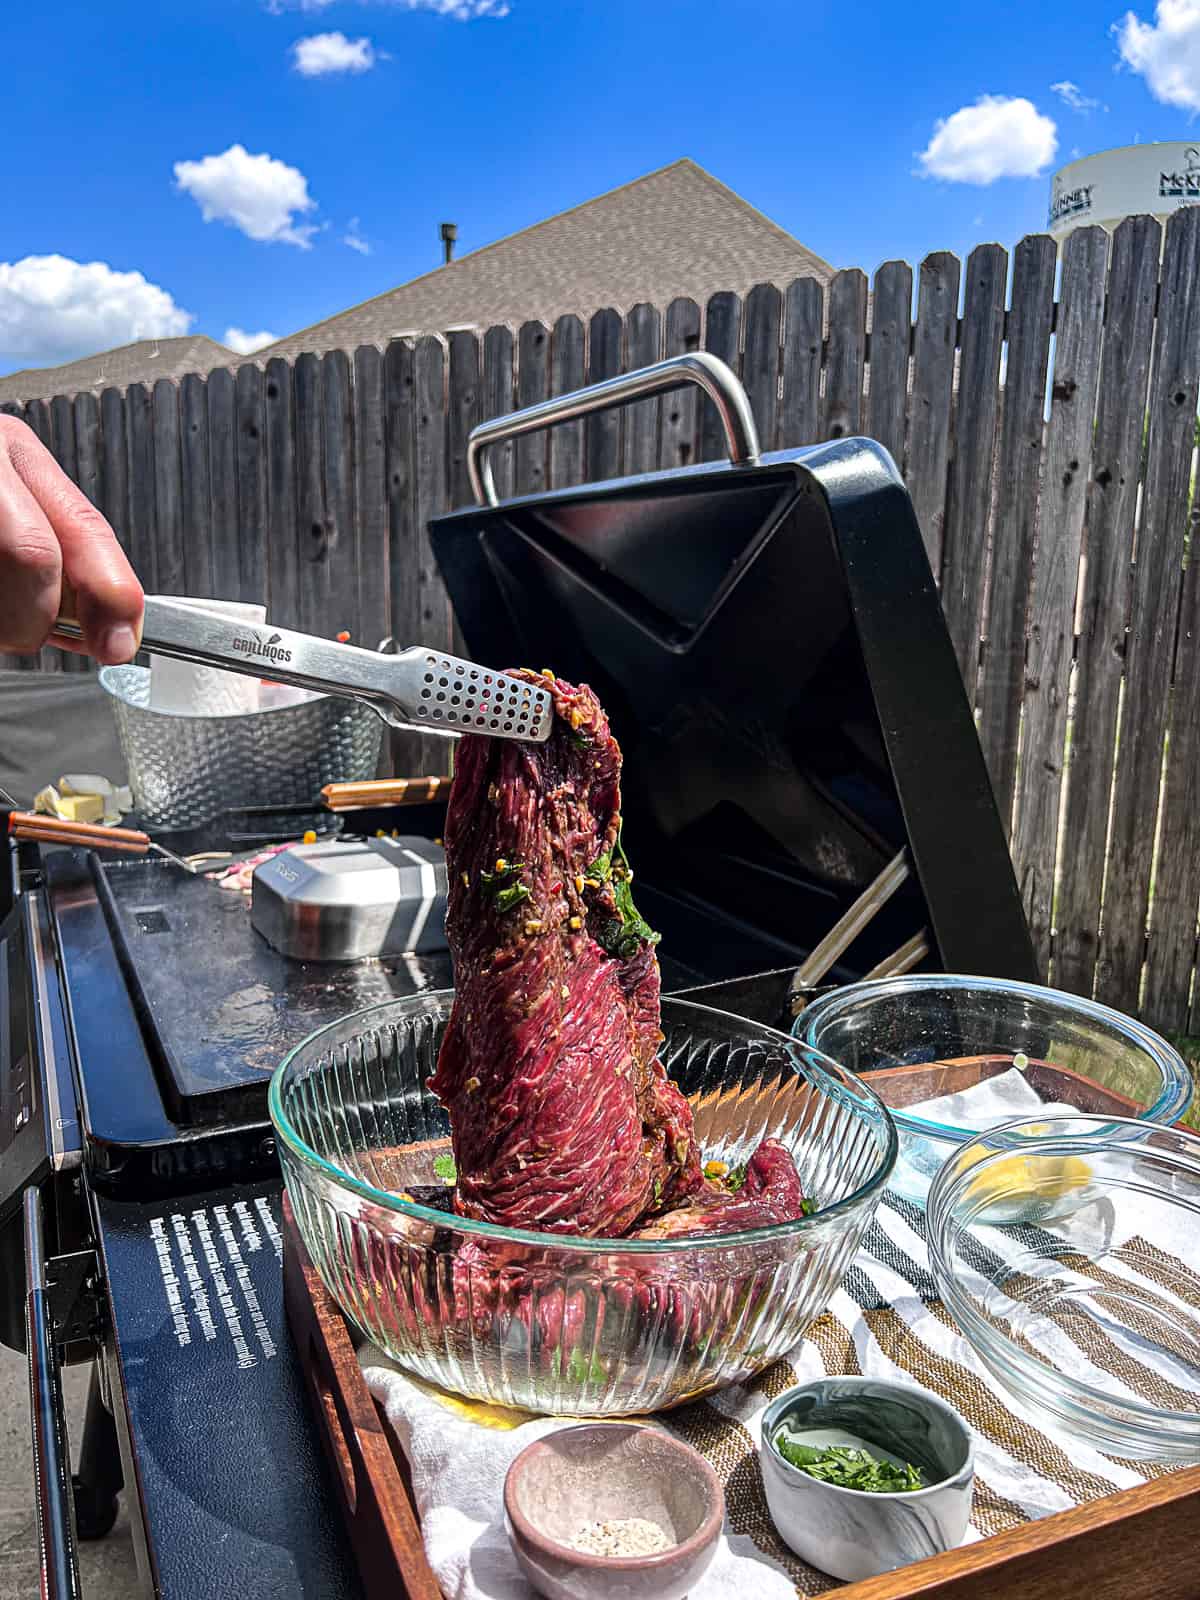 Tongs pulling tenderized flap meat out of marinade next to Traeger Flatrock Griddle Grill